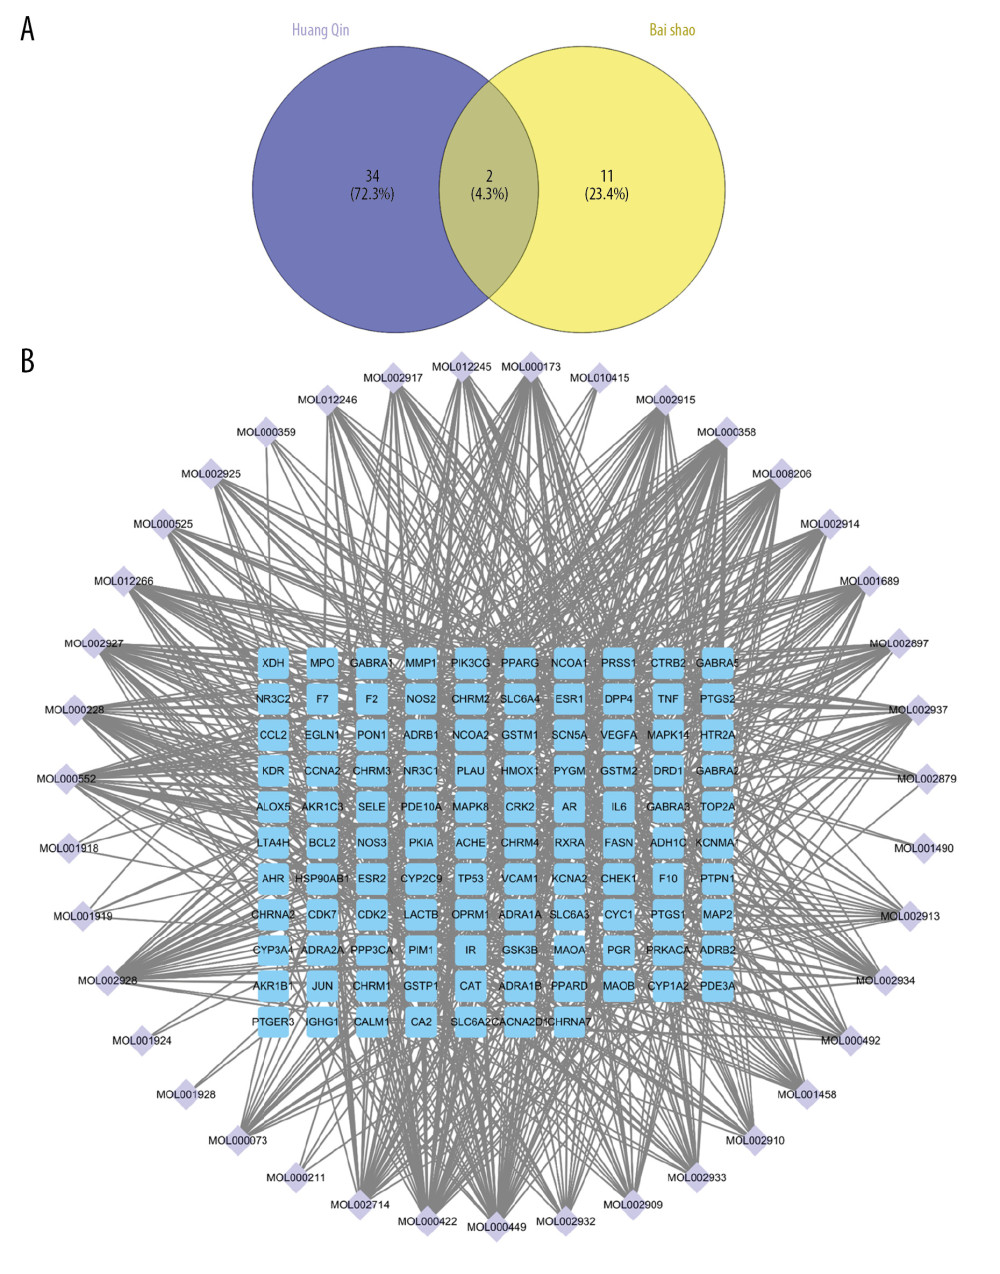 Bioactive compounds screening and compound target network construction. (A) The number of bioactive compounds in Huang Qin and Bai Shao are shown in a Venn diagram. (B) Compound target network of Huang Qin-Bai Shao herb pair constructed for topological analysis.